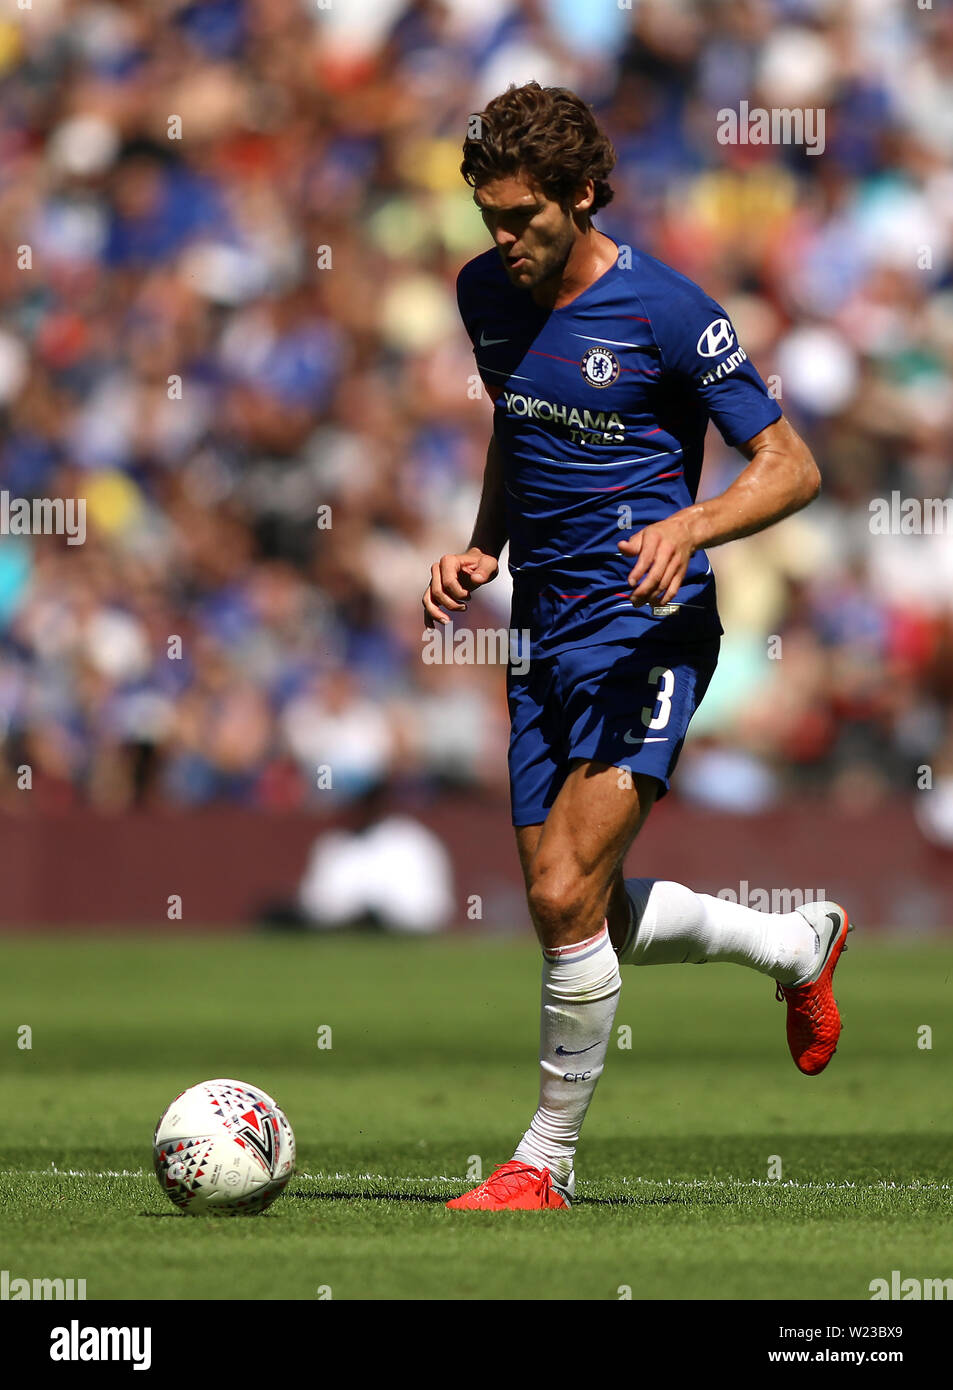 Marcos Alonso von Chelsea - Chelsea V Manchester City, FA Community Shield, Wembley Stadion, London (Wembley) - 5. August 2018 Stockfoto